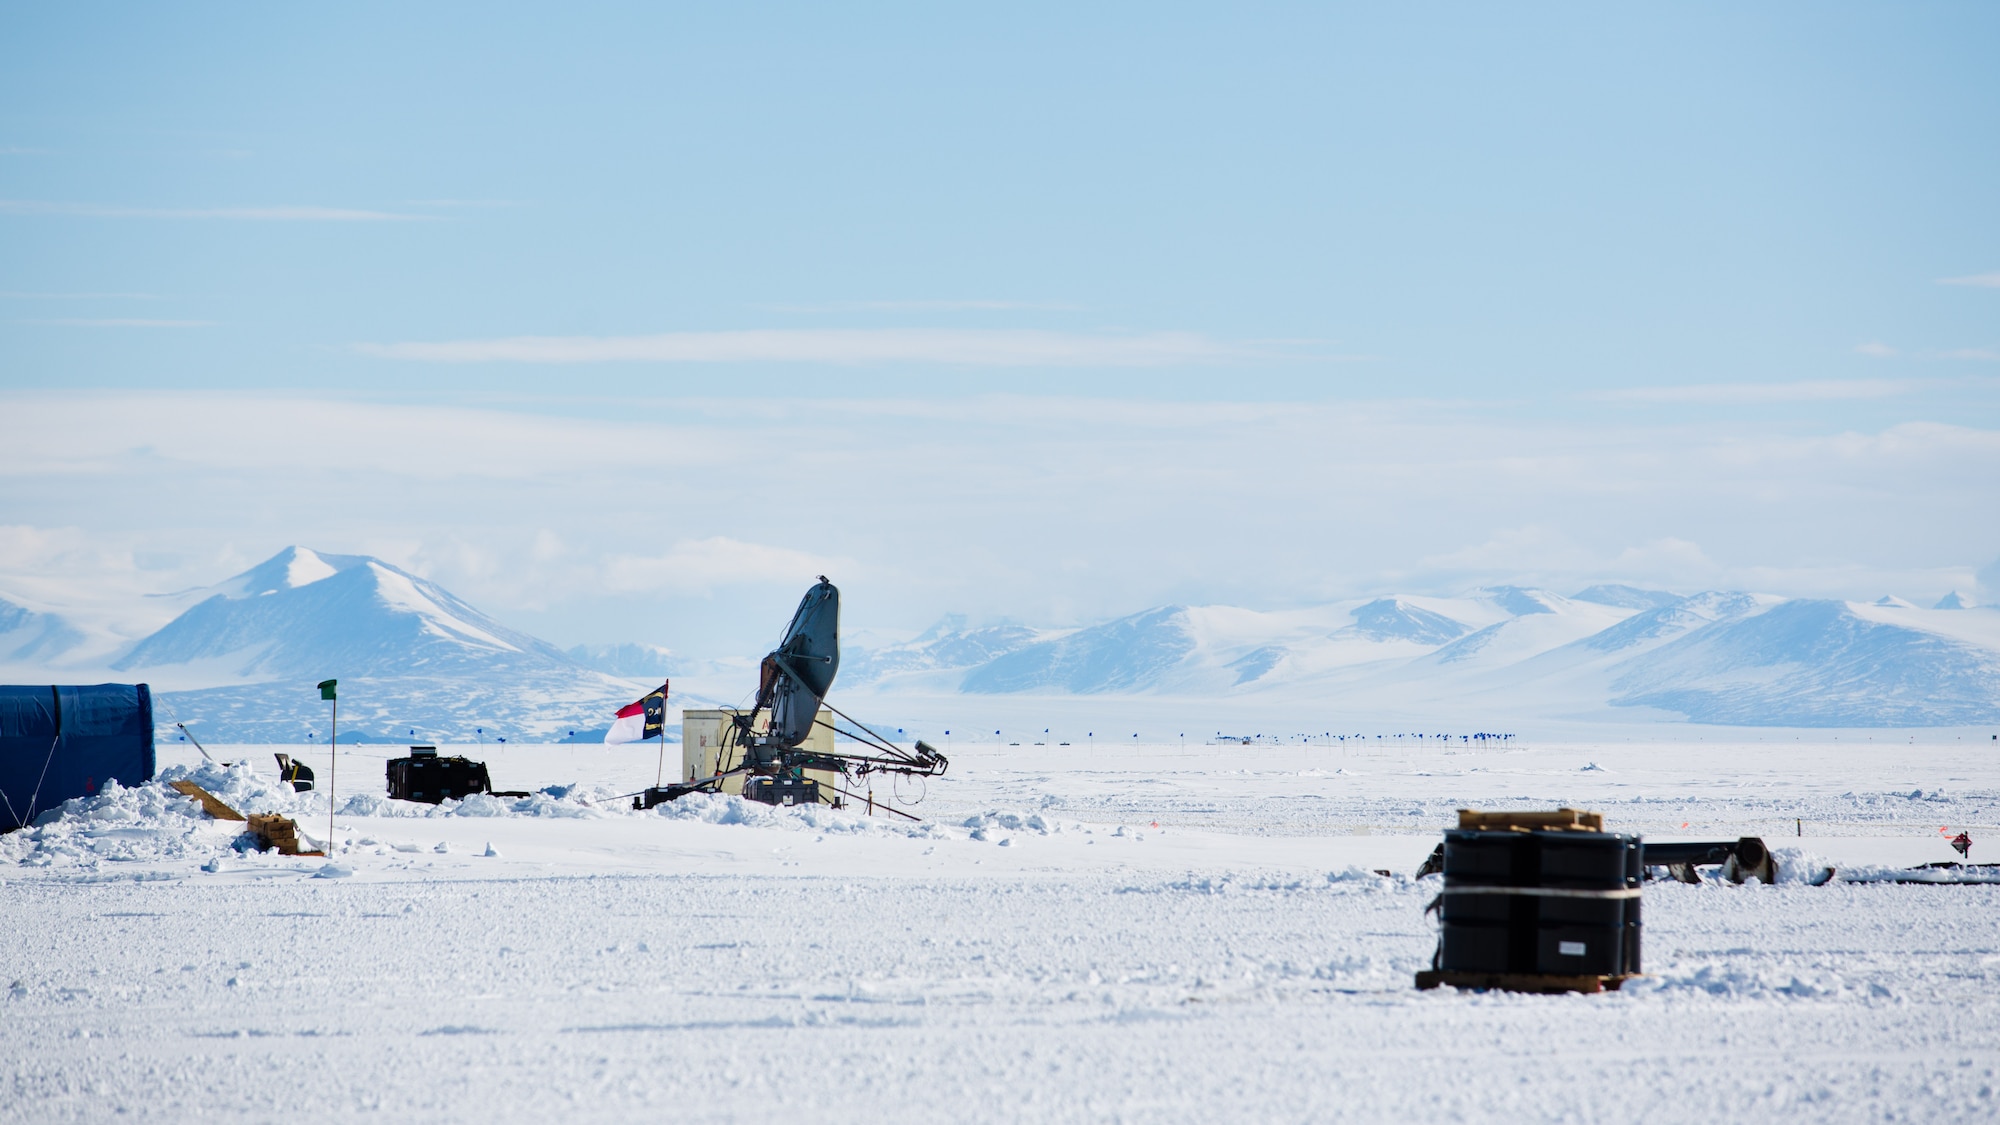 A deployable satellite belonging to the 263rd Combat Communications Squadron with the North Carolina Air National Guard is set up on an ice field for use during Operation Deep Freeze (ODF), at McMurdo Station, Antarctica, Dec. 1, 2018. ODF is a military mission in support of the National Science Foundation throughout the continent of Antarctica, to provide air, land, and sea support to McMurdo Station. (Courtesy photo submitted by Civ. Johnny Chiang)